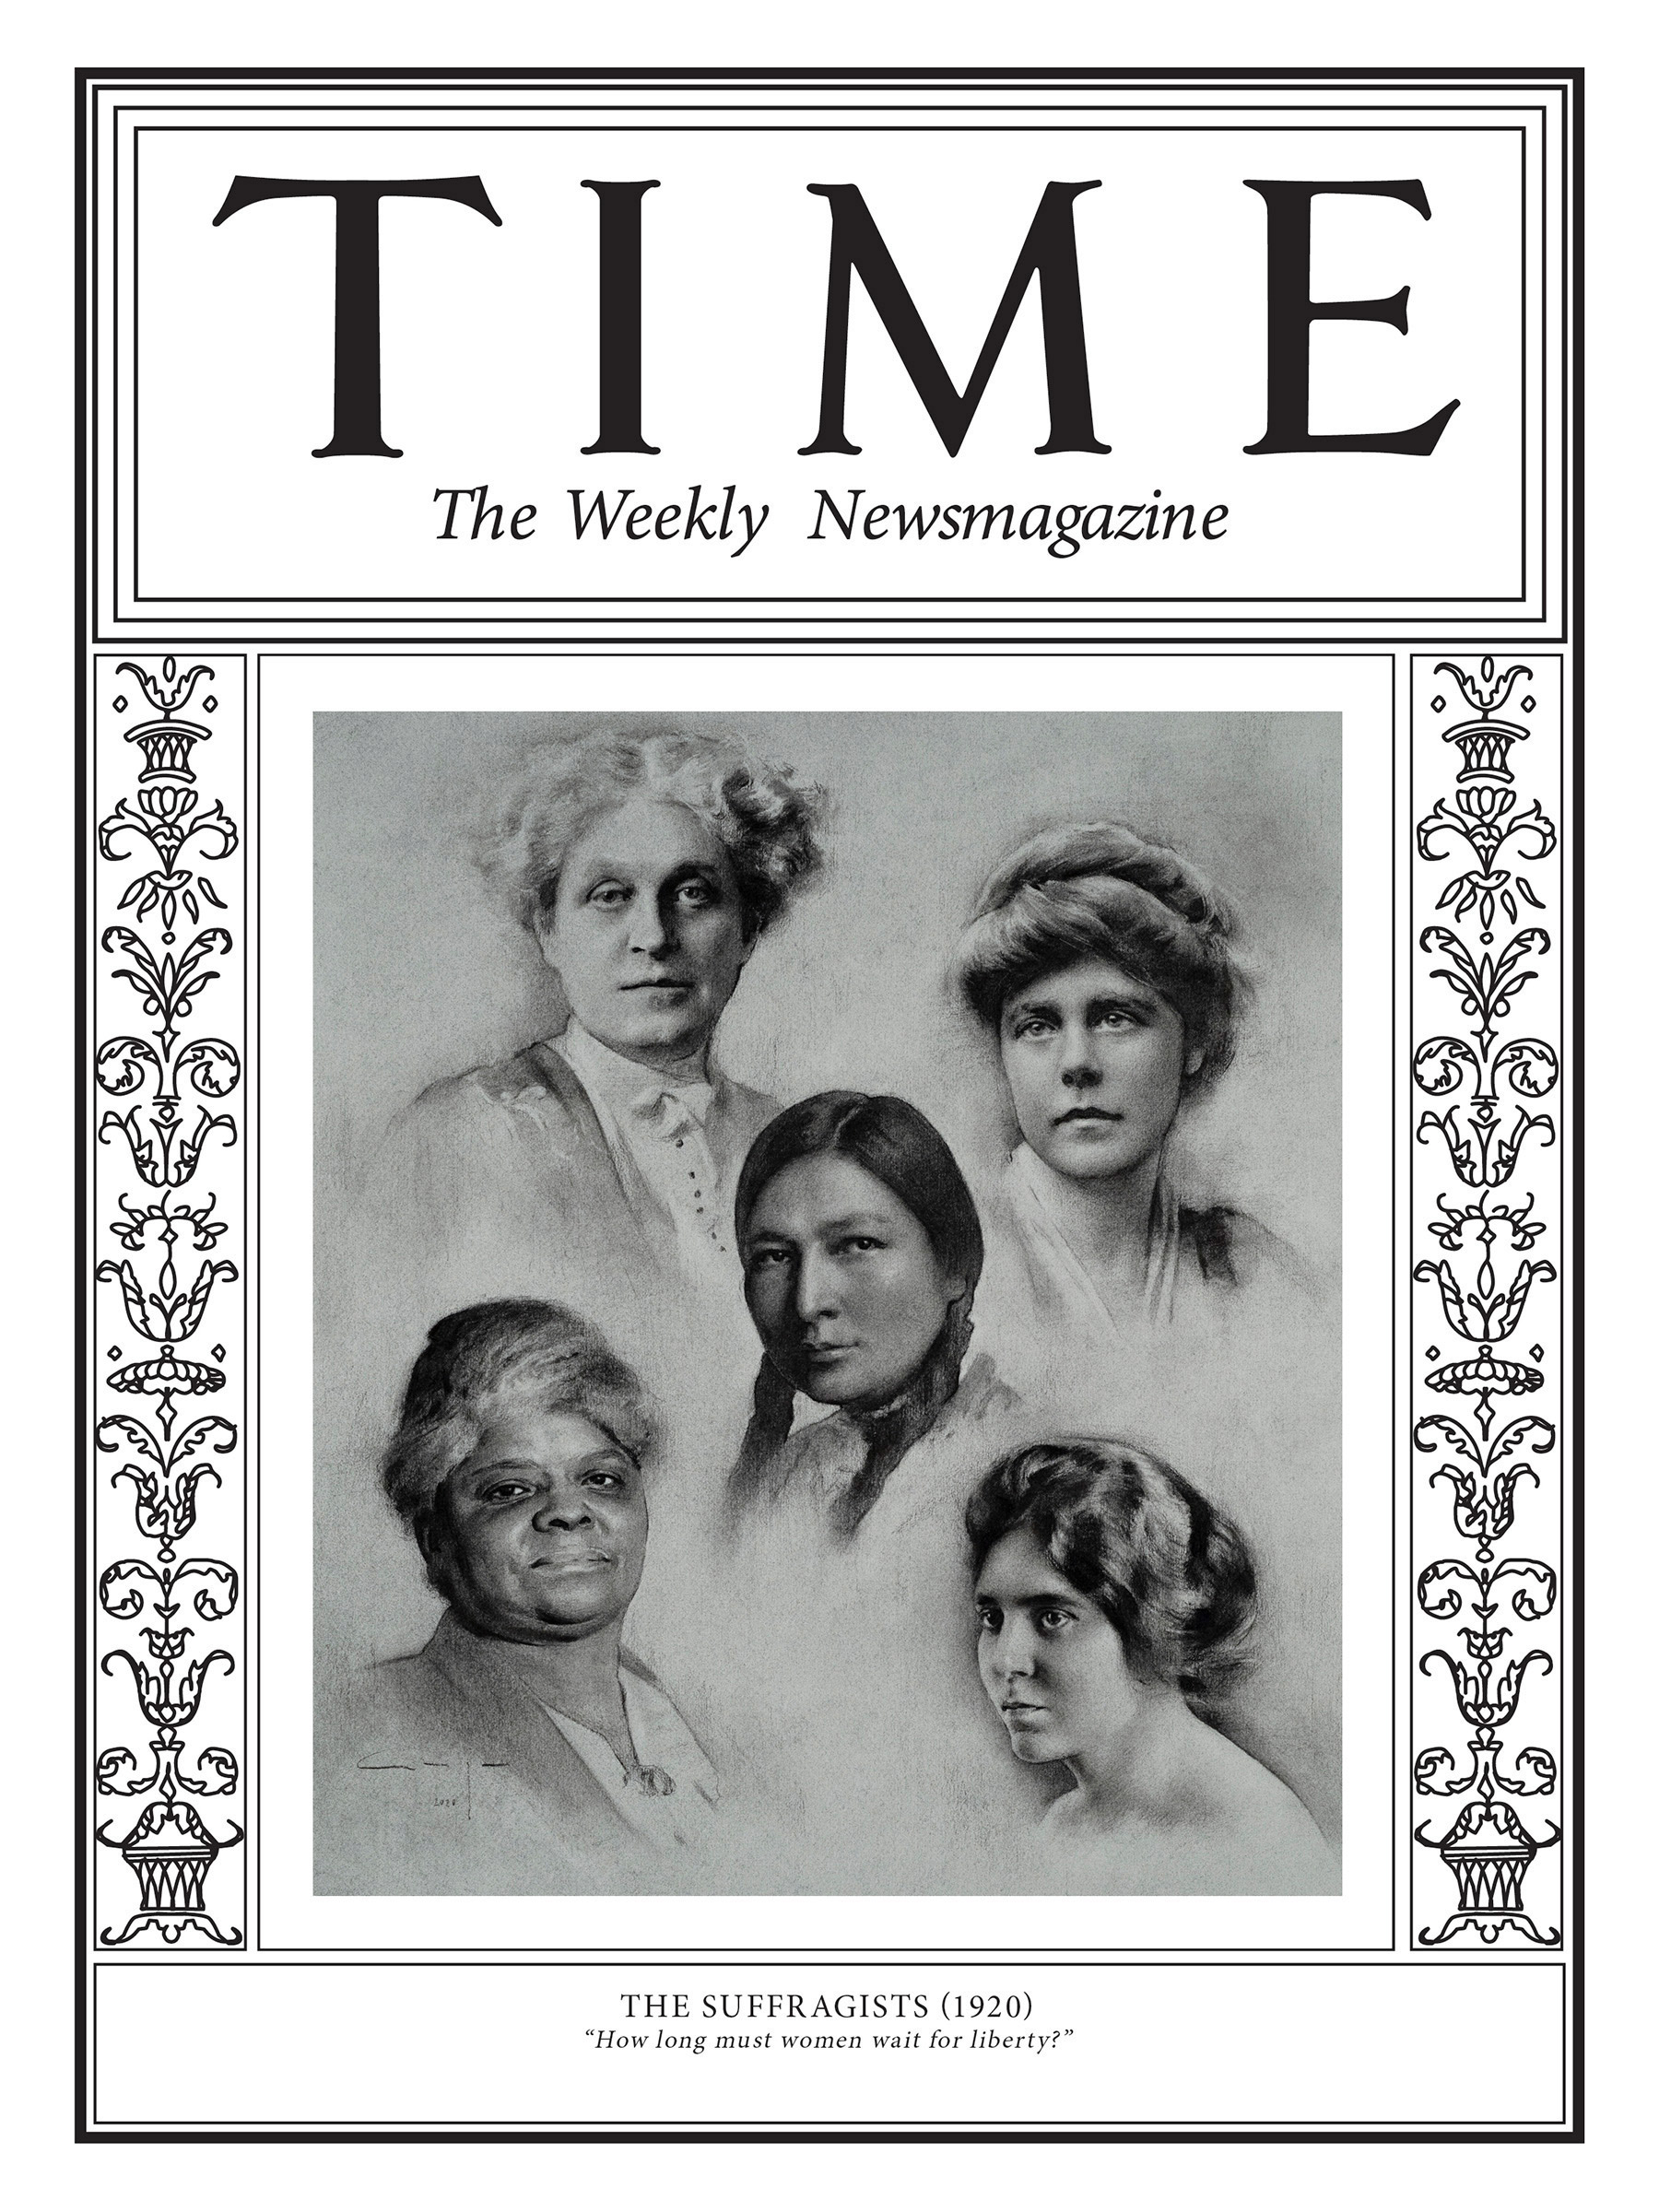 <a href="https://fineartamerica.com/featured/the-suffragists-1920-time.html"><strong>Buy the cover art→</strong></a> (Illustration by Amaya Gurpide for TIME; Getty (4), Granger)